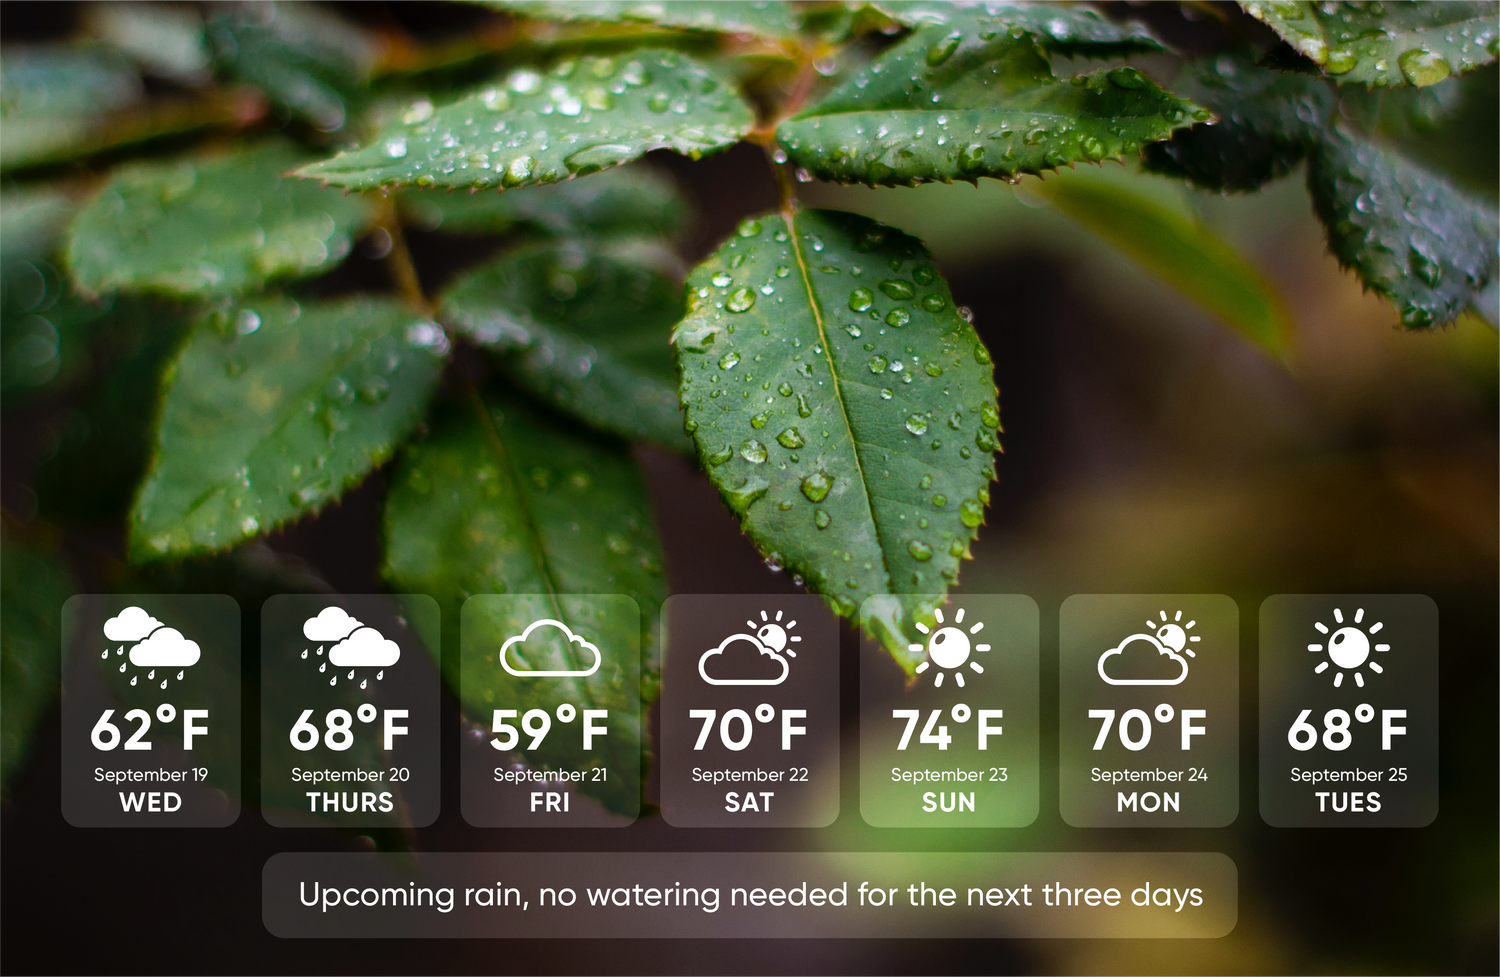 Wet plant leaves with weekly weather forecast overlay 